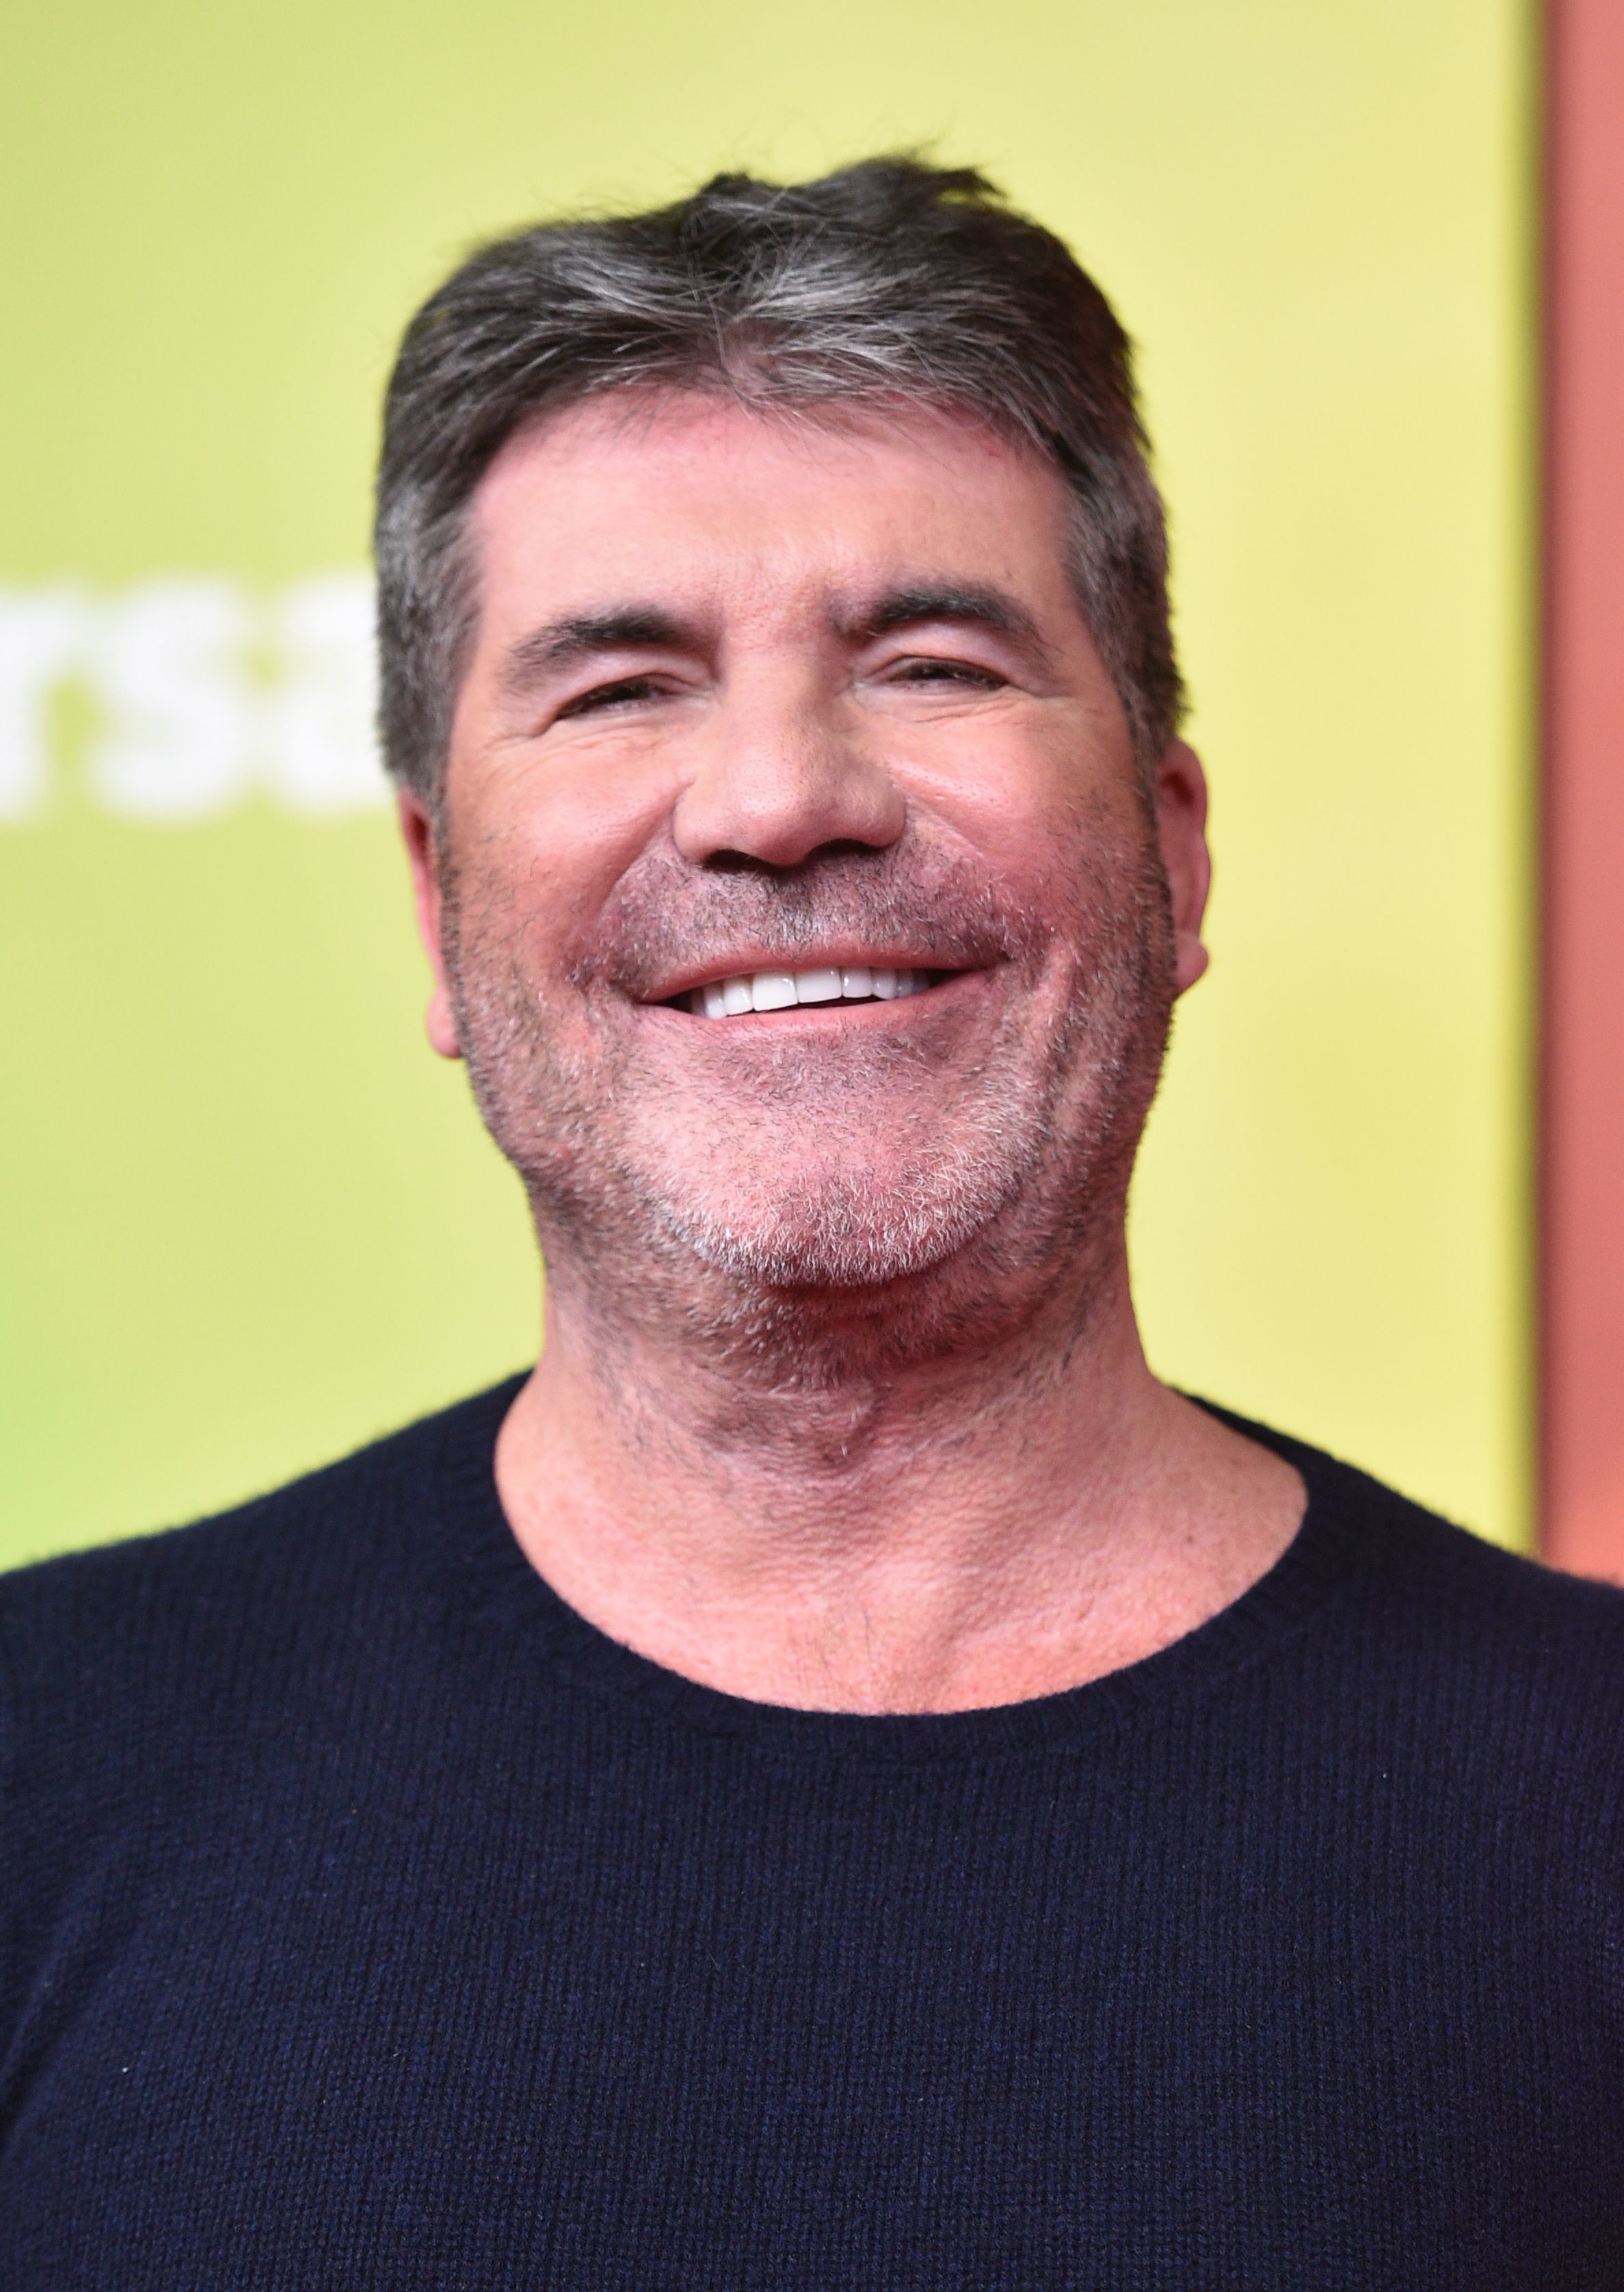 <p>In May 2018, <a href="https://www.wonderwall.com/celebrity/profiles/overview/simon-cowell-1009.article">Simon Cowell</a> told The Sun on Sunday that he'd visited cosmetic surgeon Jean-Louis Sebagh for a Silhouette Soft Lift. The $2,700 procedure, the newspaper writes, "involves sewing bioplastic-infused thread into the face and neck and tugging it to get rid of sagging skin." The "America's Got Talent" judge explained to the newspaper, "There's lots of things you can do now. You don't just have to stuff your face with filler and Botox." But it took him a few more years to learn his lesson...</p>